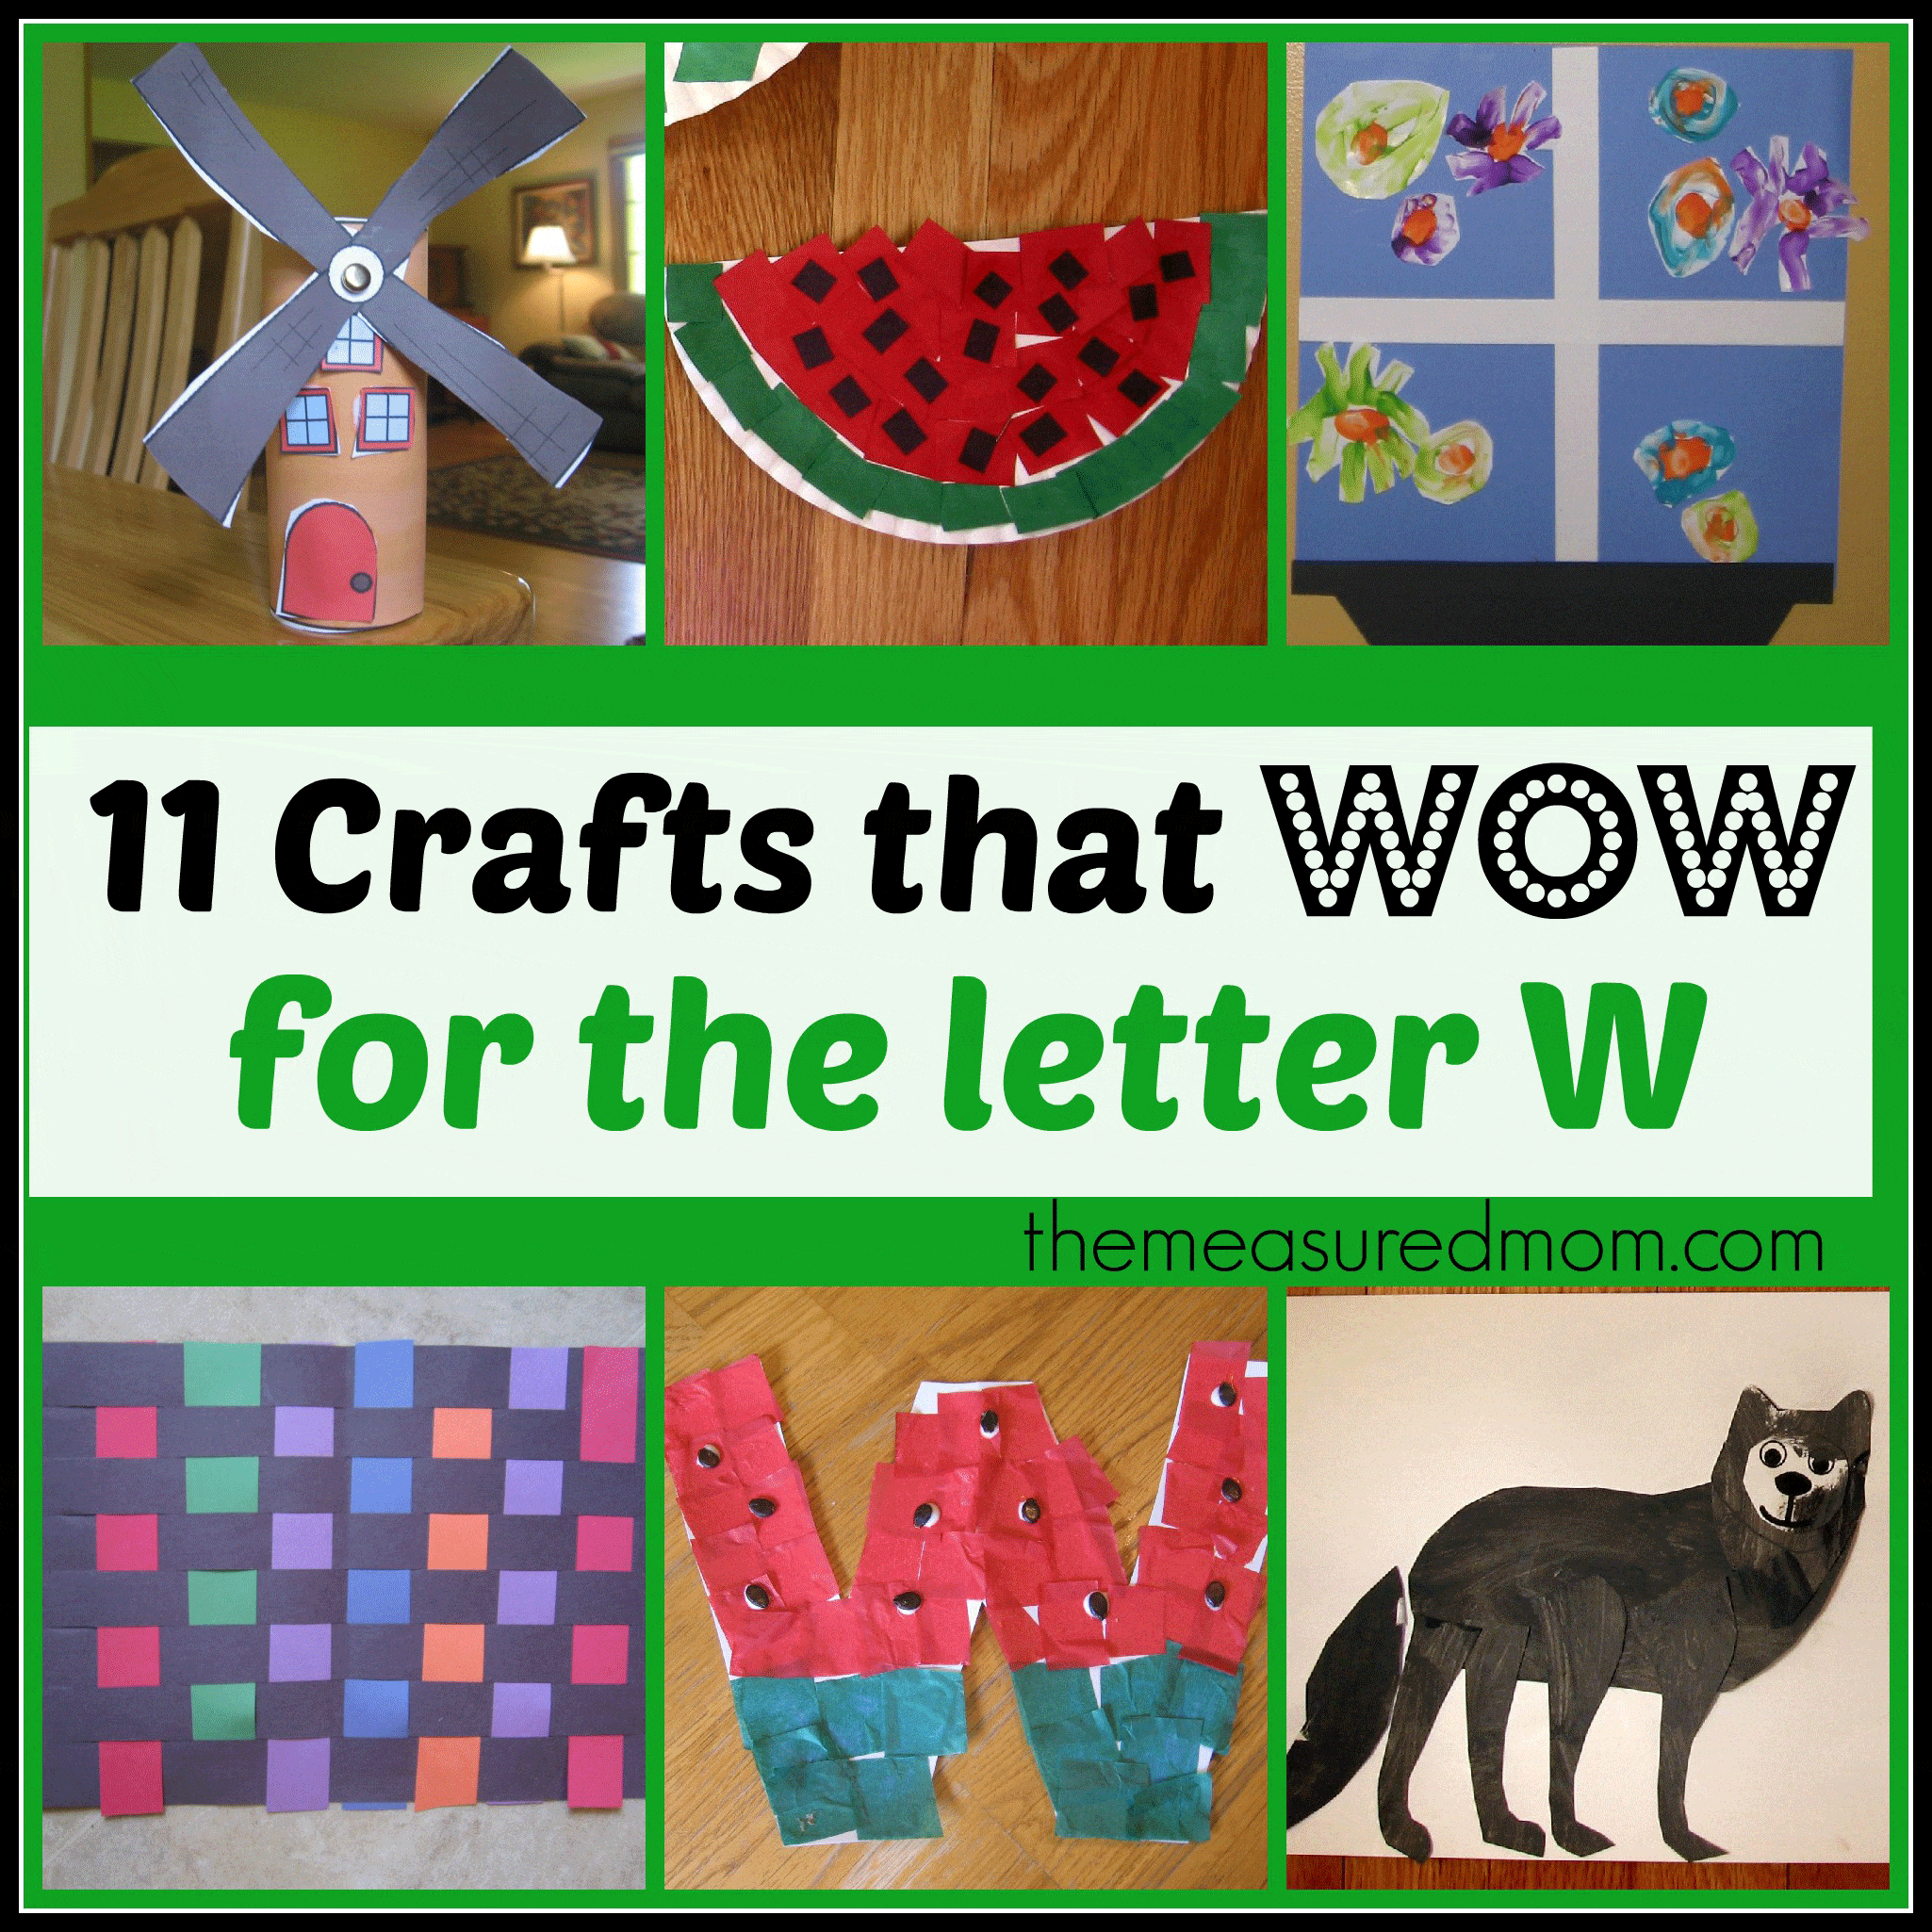 Letter W crafts - The Measured Mom